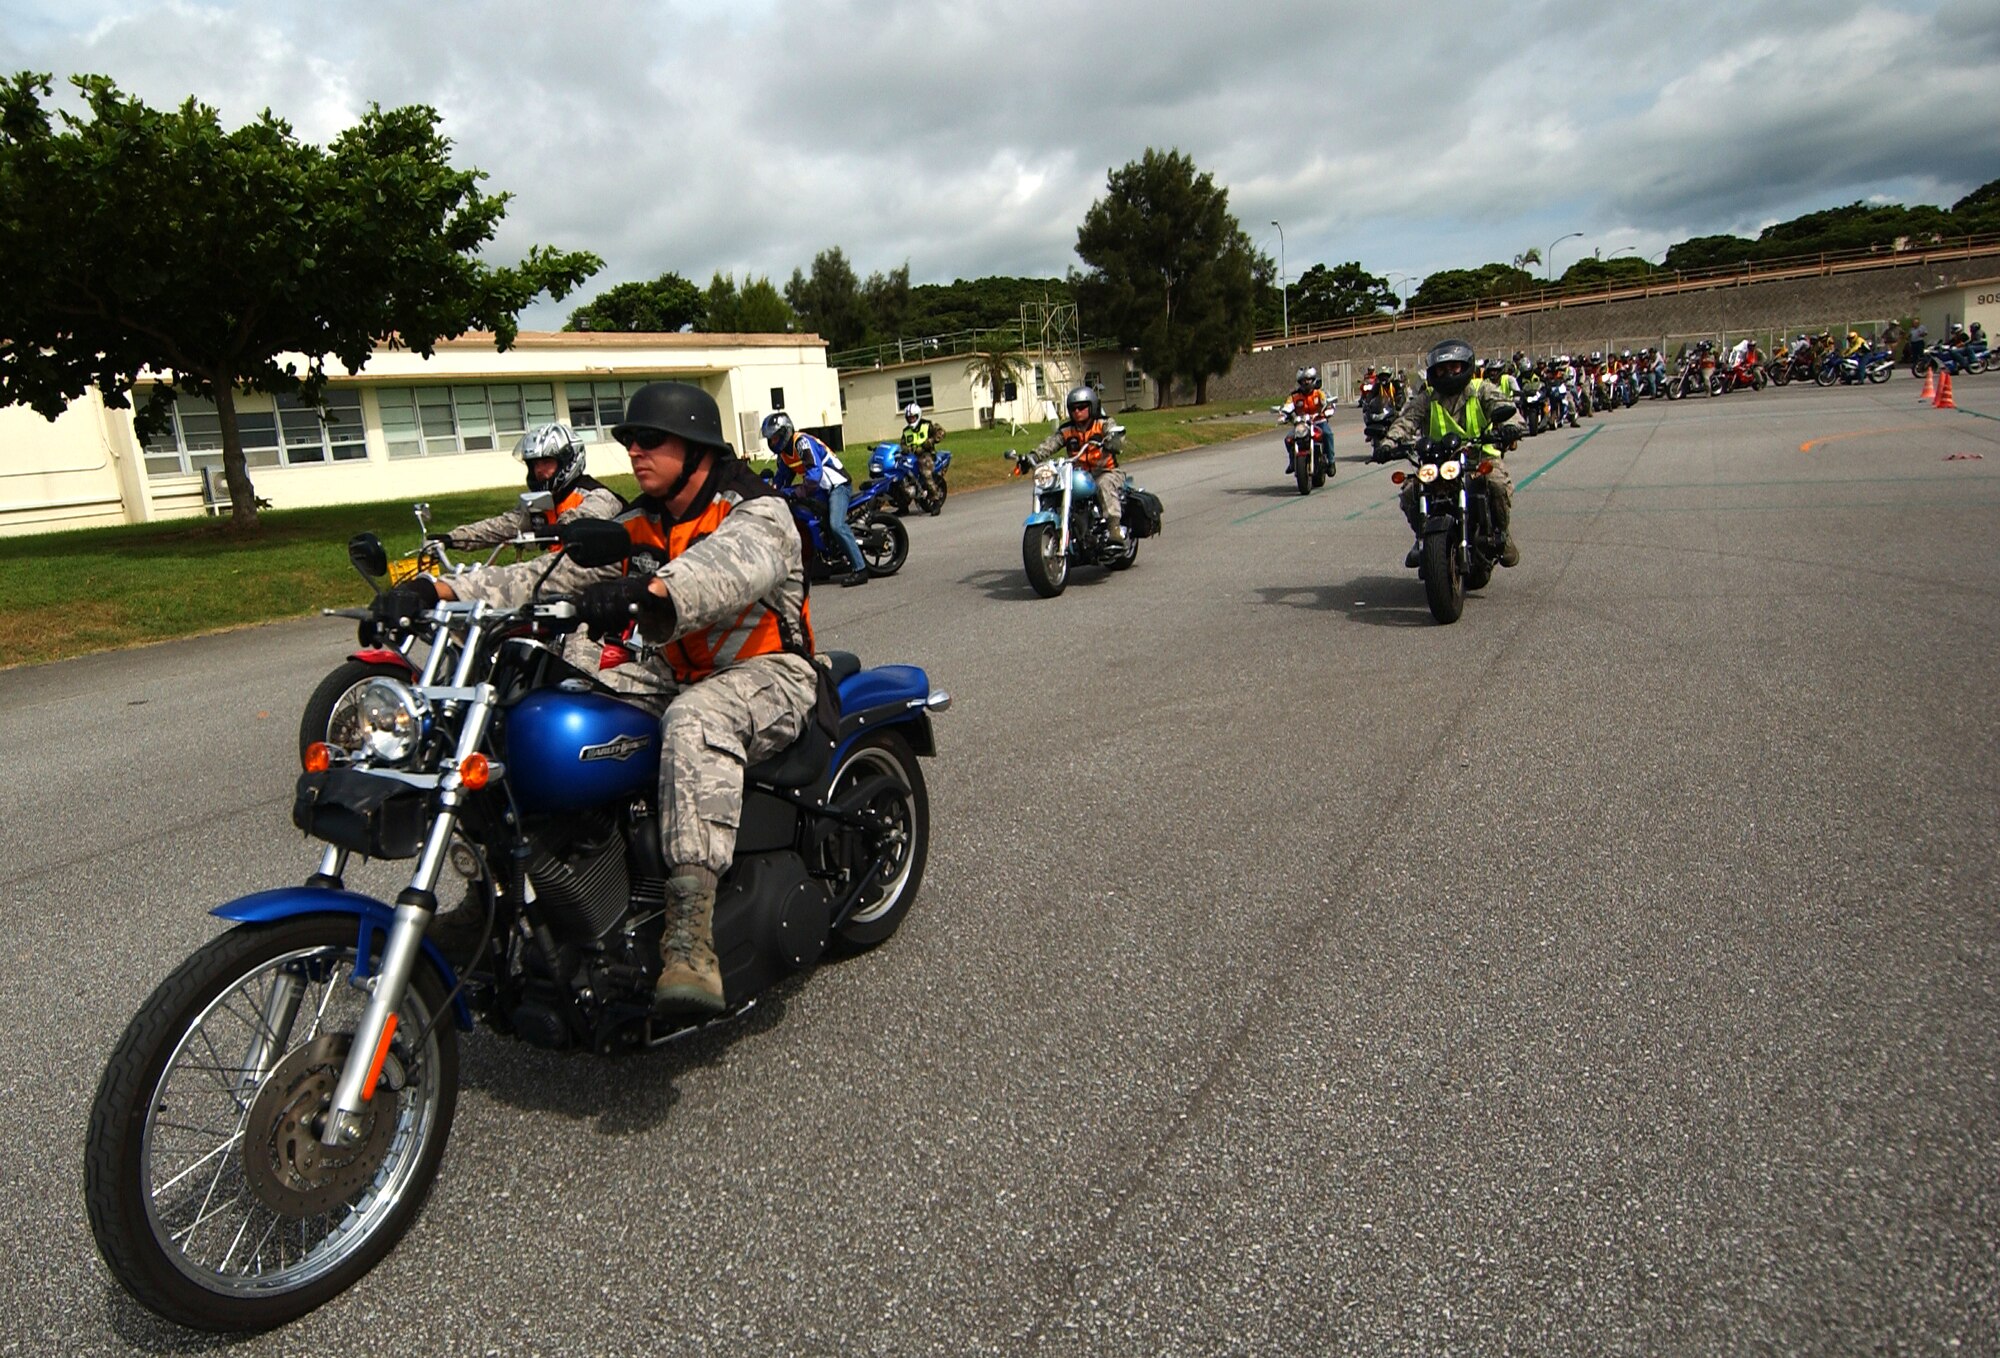 Military members and dependents participate in a safety awareness ride July 25 as part of Motorcycle Safety Week. About 80 riders took part in the ride following a motorcycle rider all-call which emphasized rider safety. (U.S. Air Force photo/Tech. Sgt. Rey Ramon)